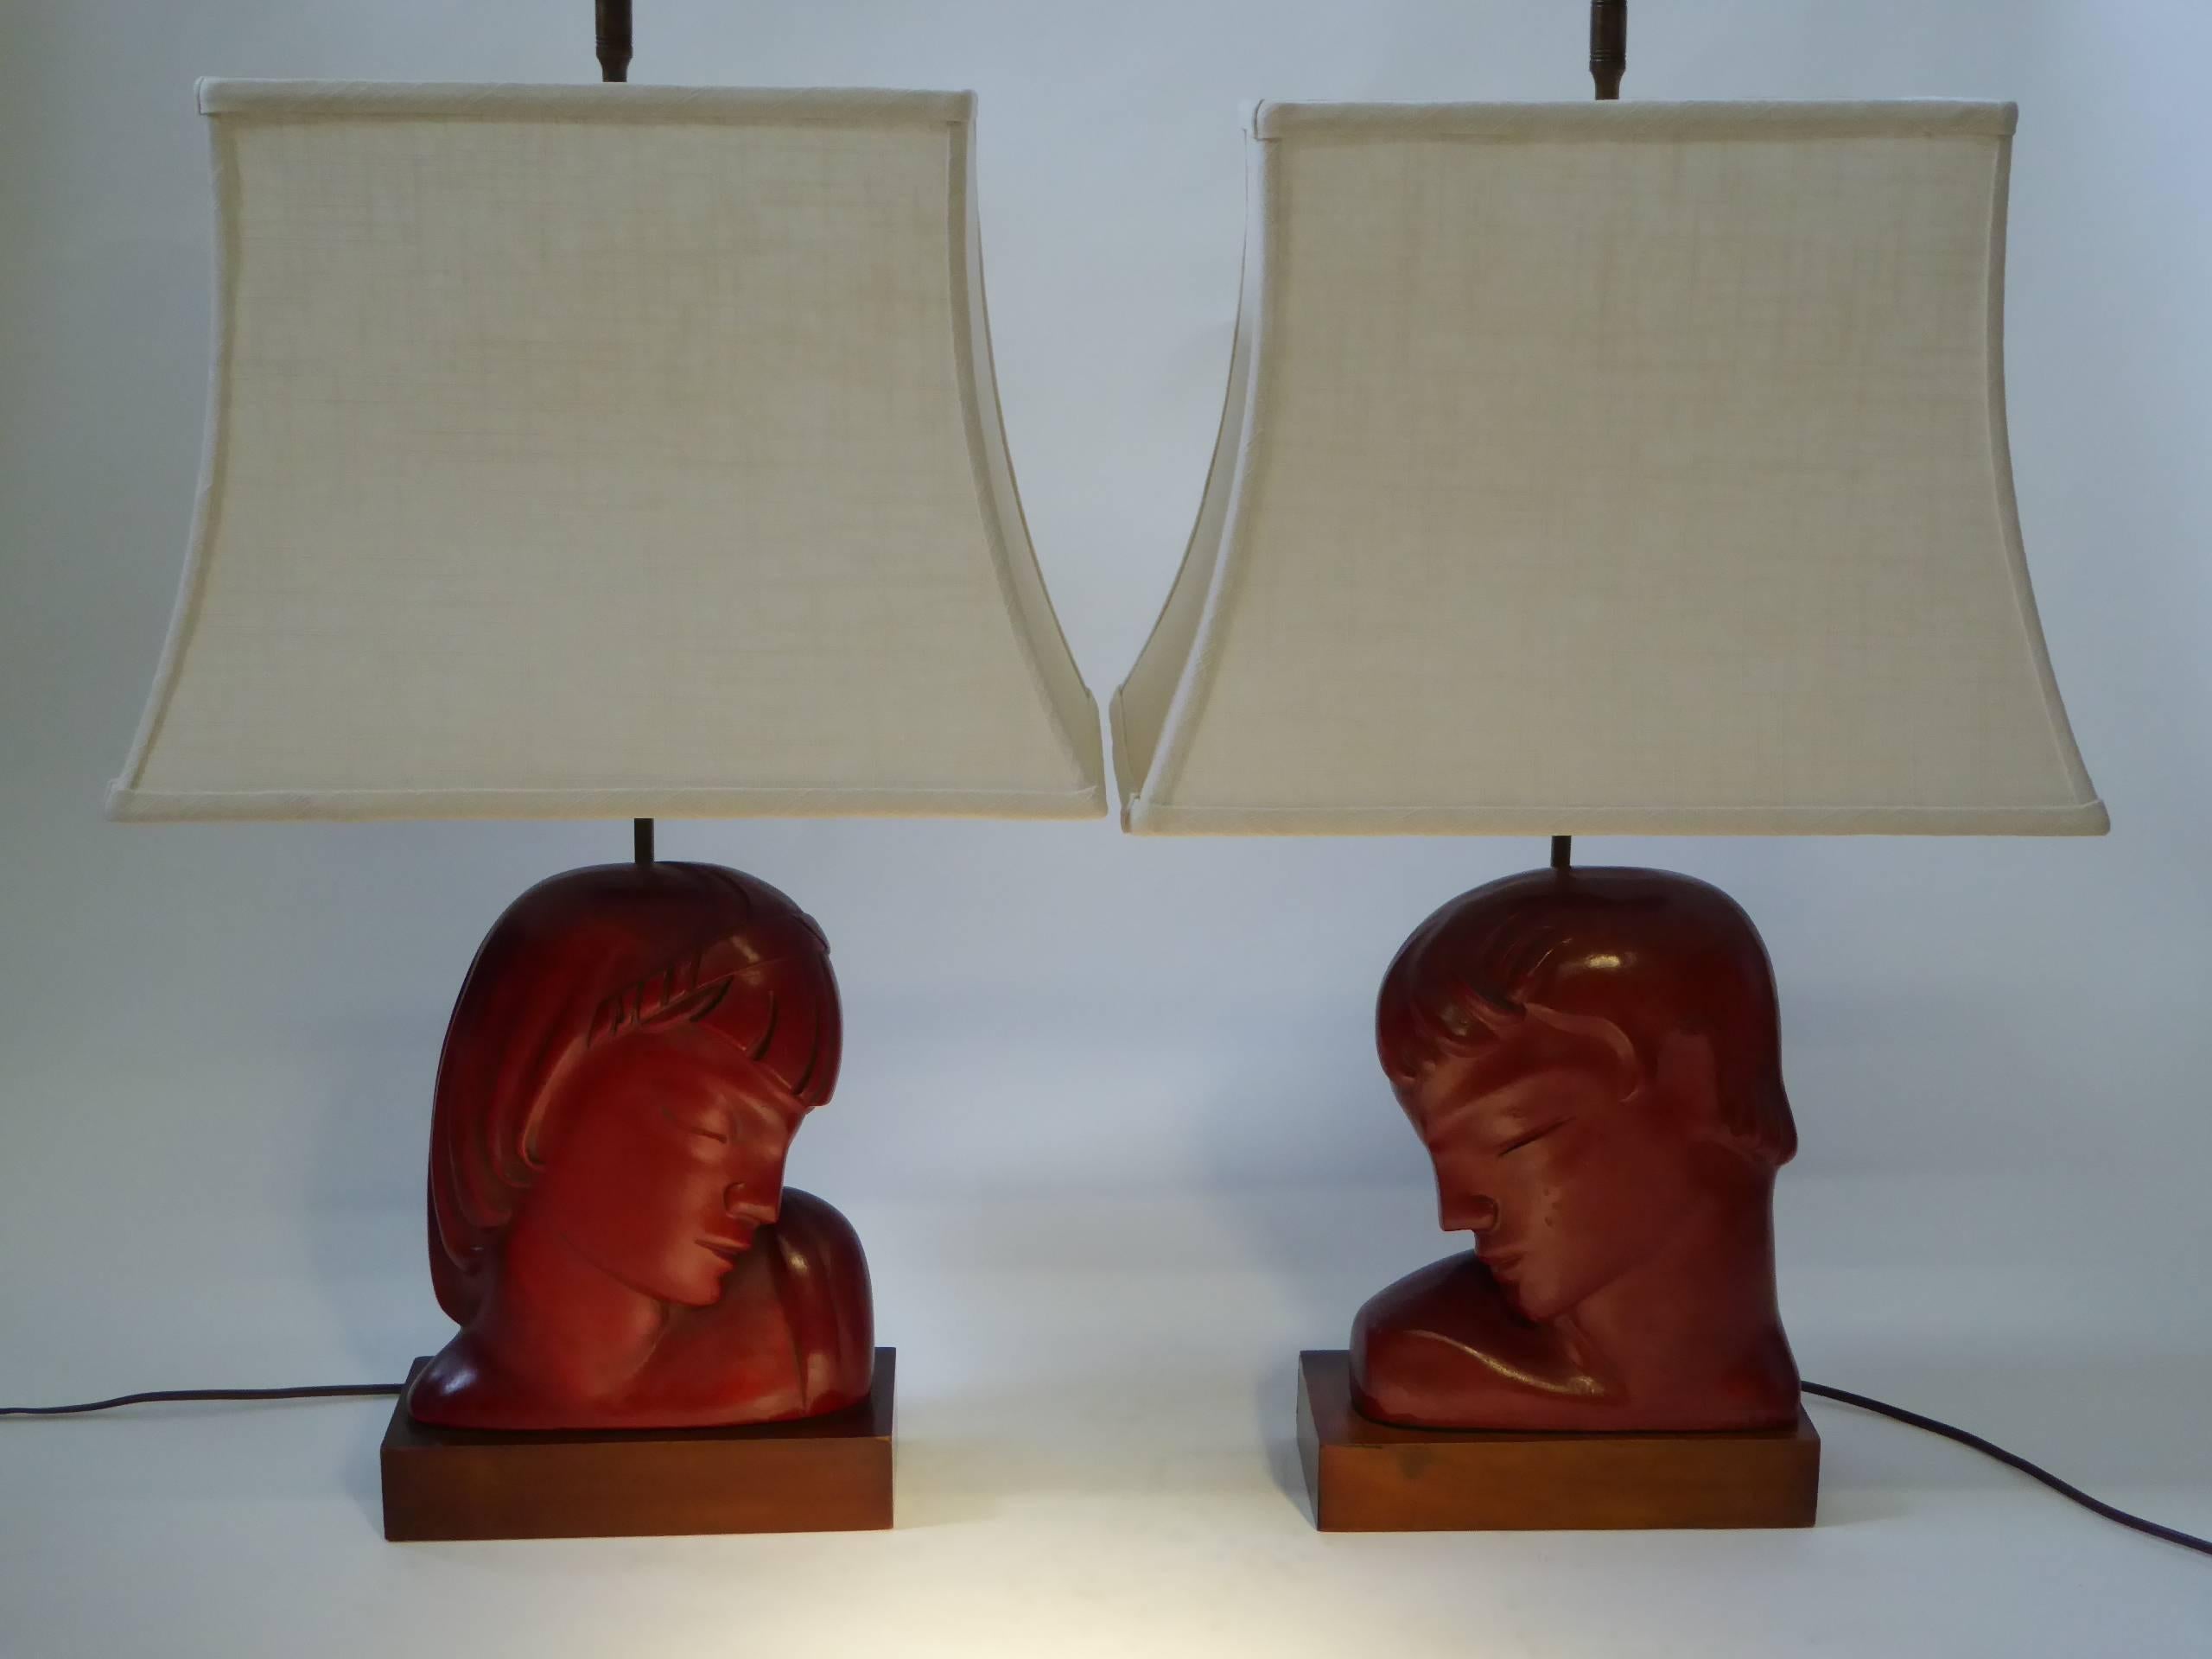 Warm and rich in Cinnabar Red, this pair of Art Deco male and female busts by Frederick Cooper Studios, signed Kupur, are from his early years as an artist sculptor, before he became known mainly for lighting and lamps, Kupur being an artistic